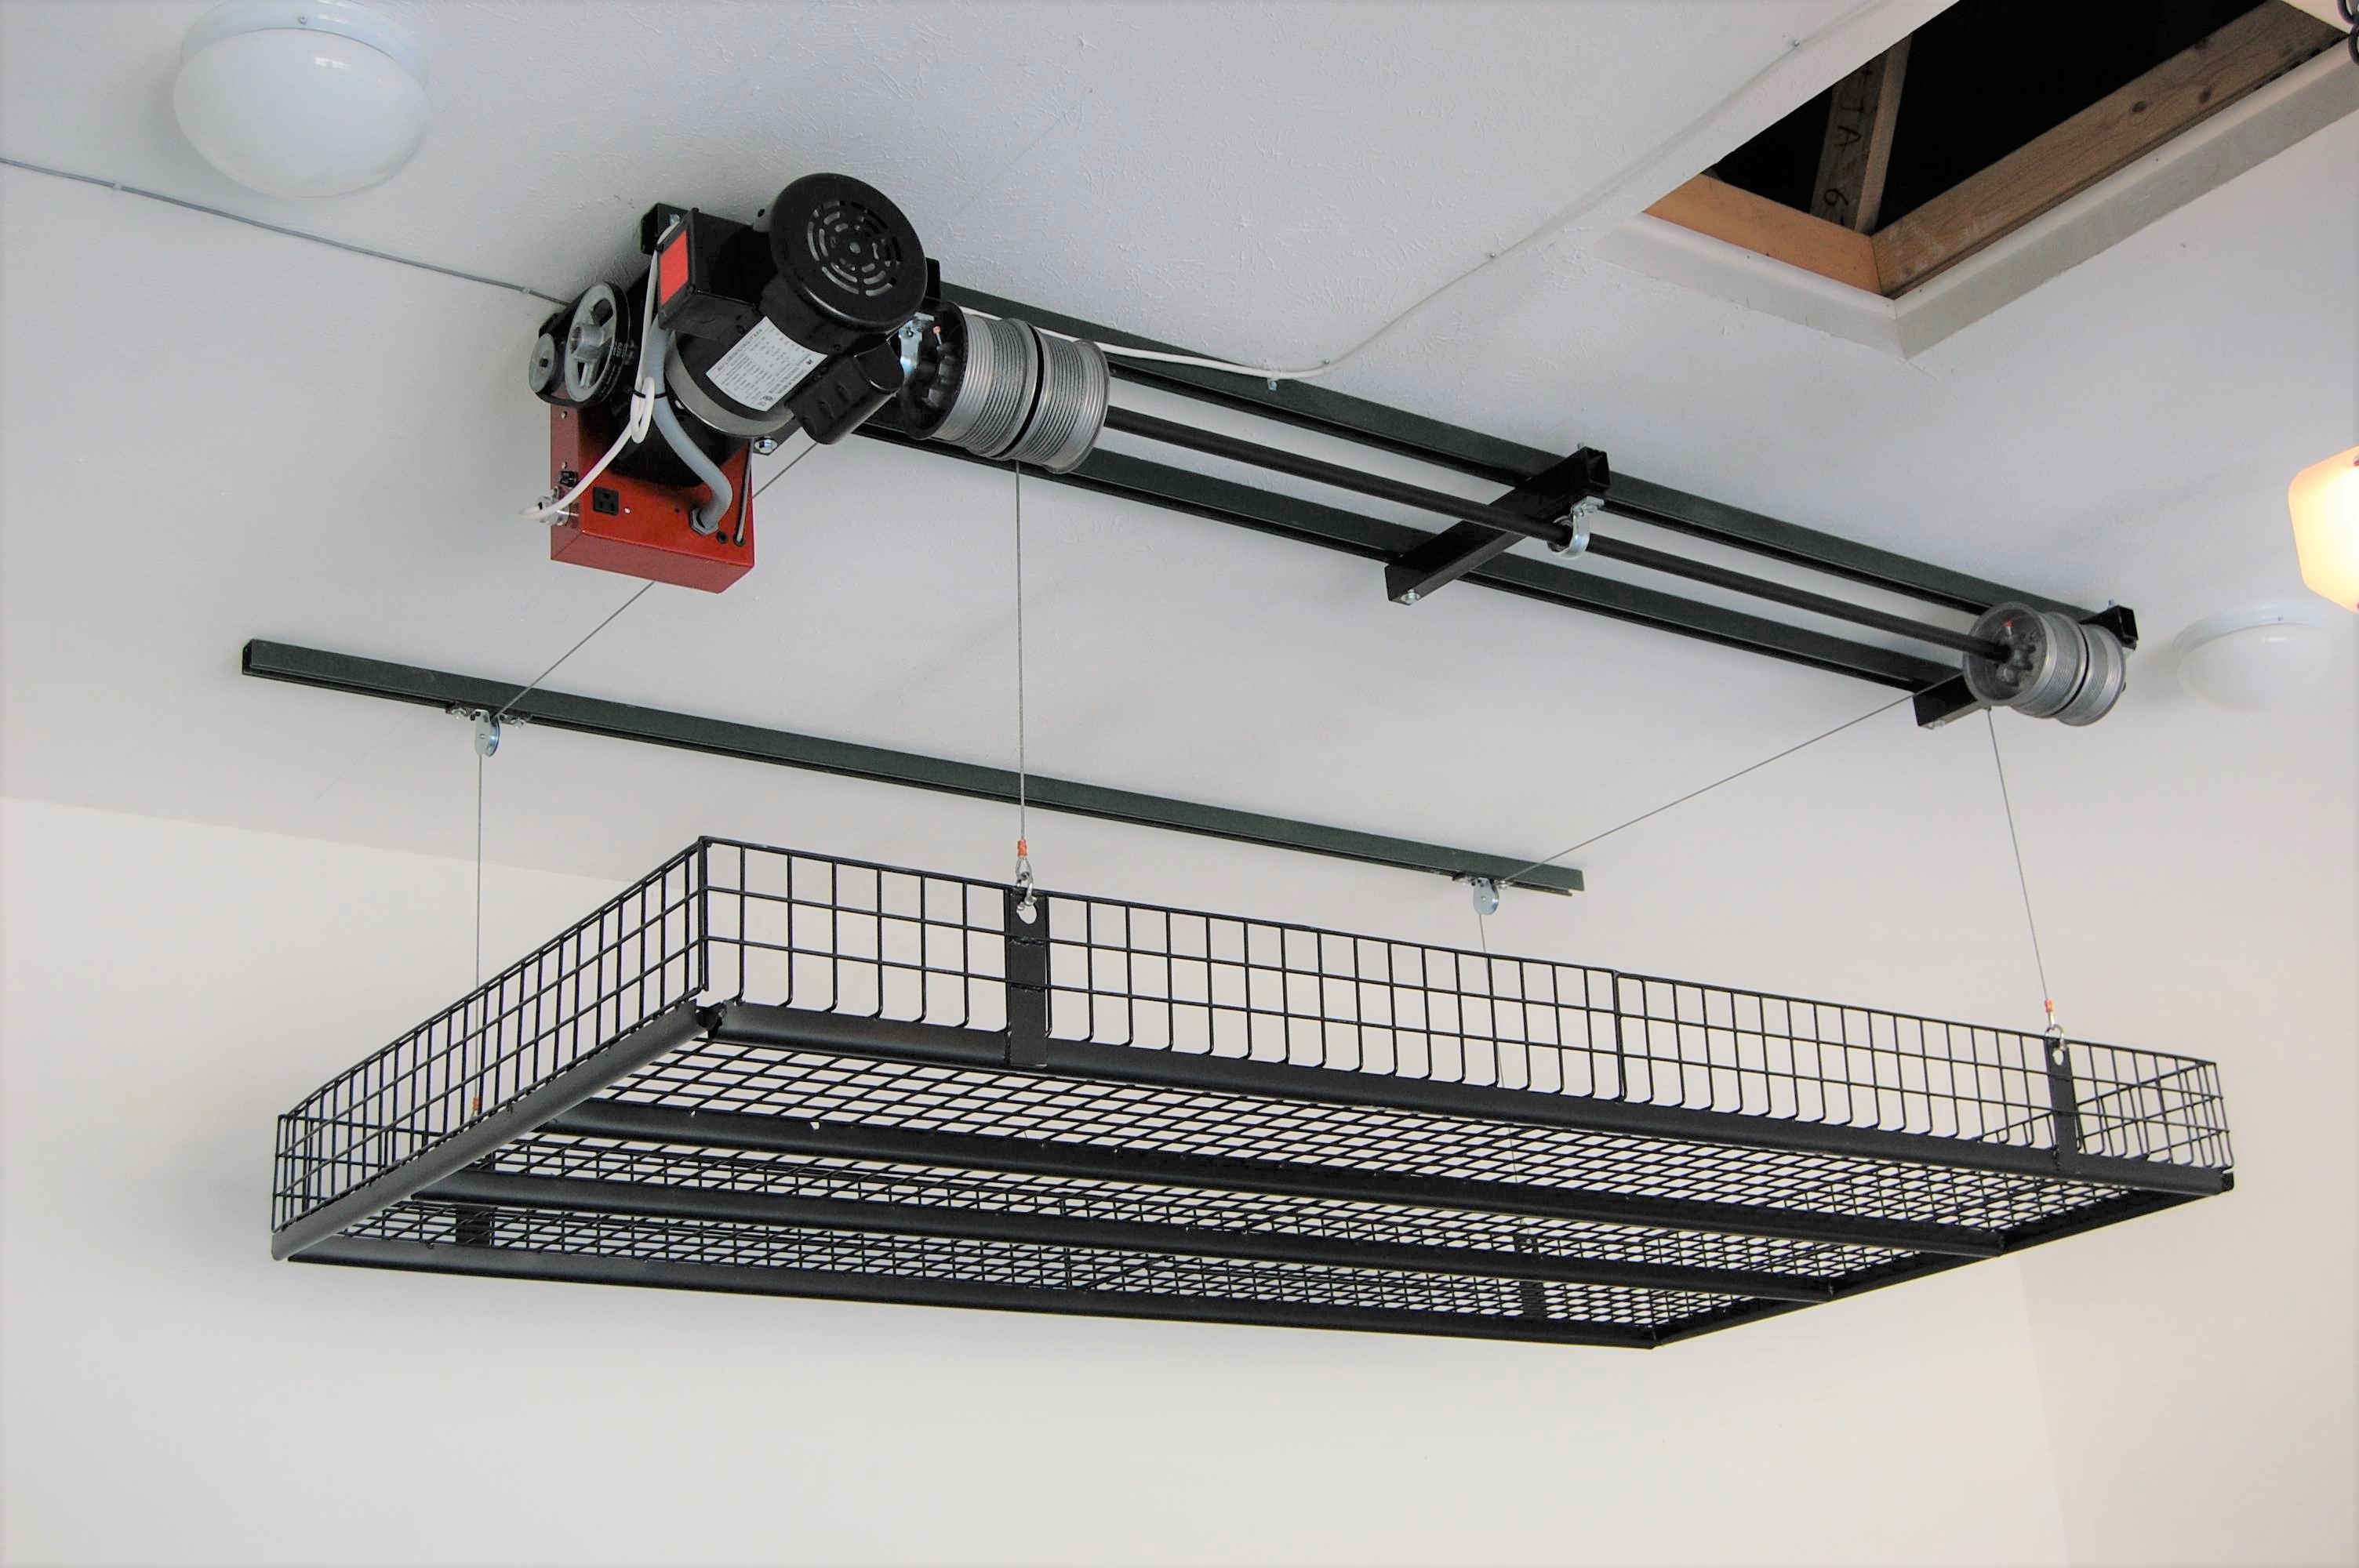 Diy Overhead Garage Storage Pulley System Garage Pulley System From